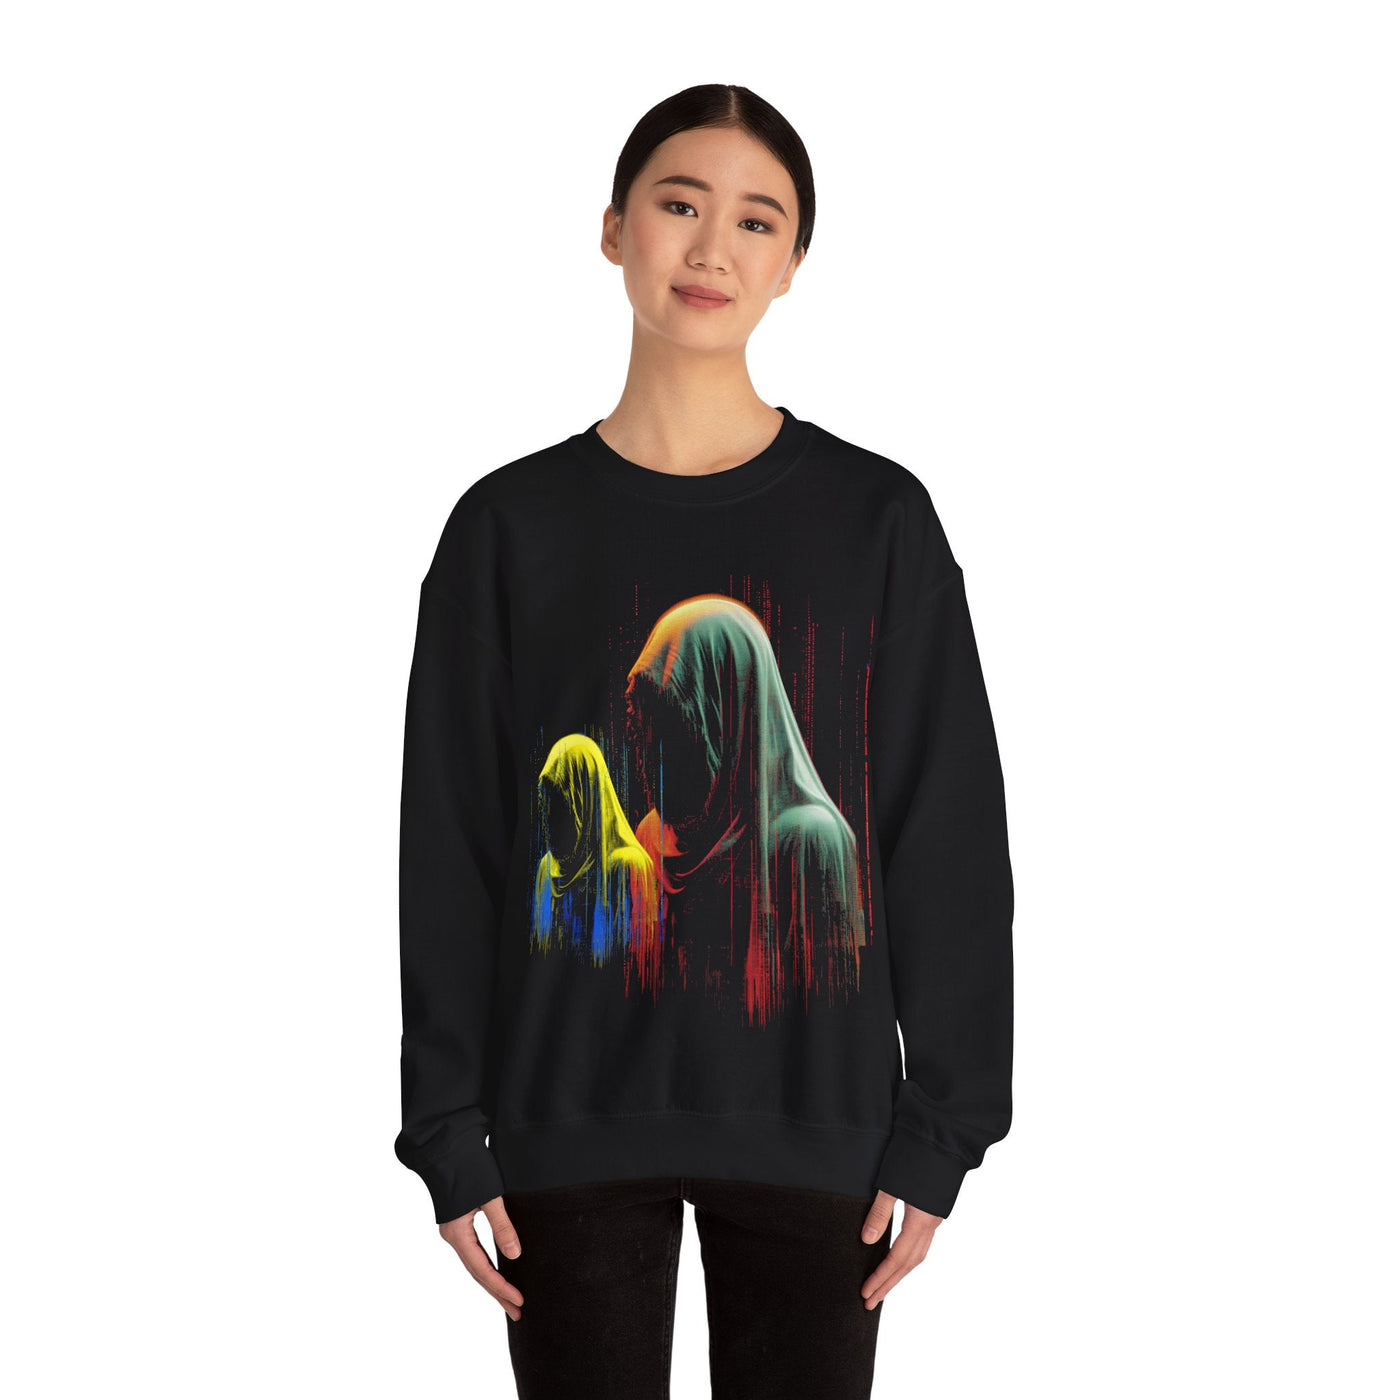 Glitchy Occulted Caped Figures Classic Sweatshirt